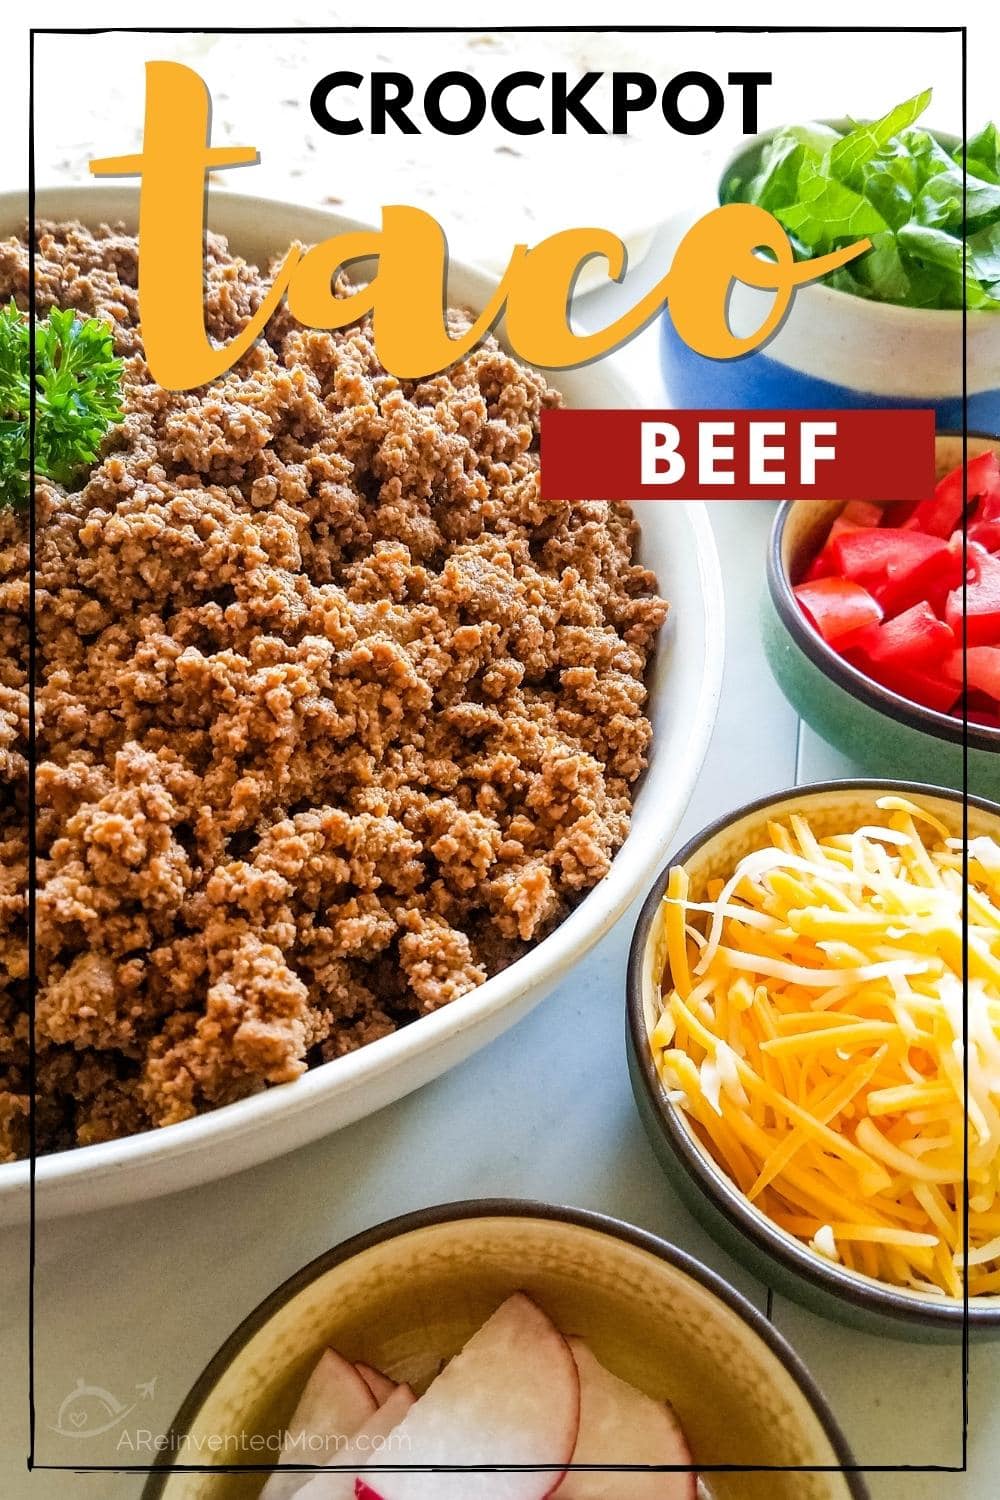 Large white bowl filled with cooked minced beef, smaller bowls filled with radishes, cheese, tomato & lettuce with Crockpot Taco Meat graphic overlay.